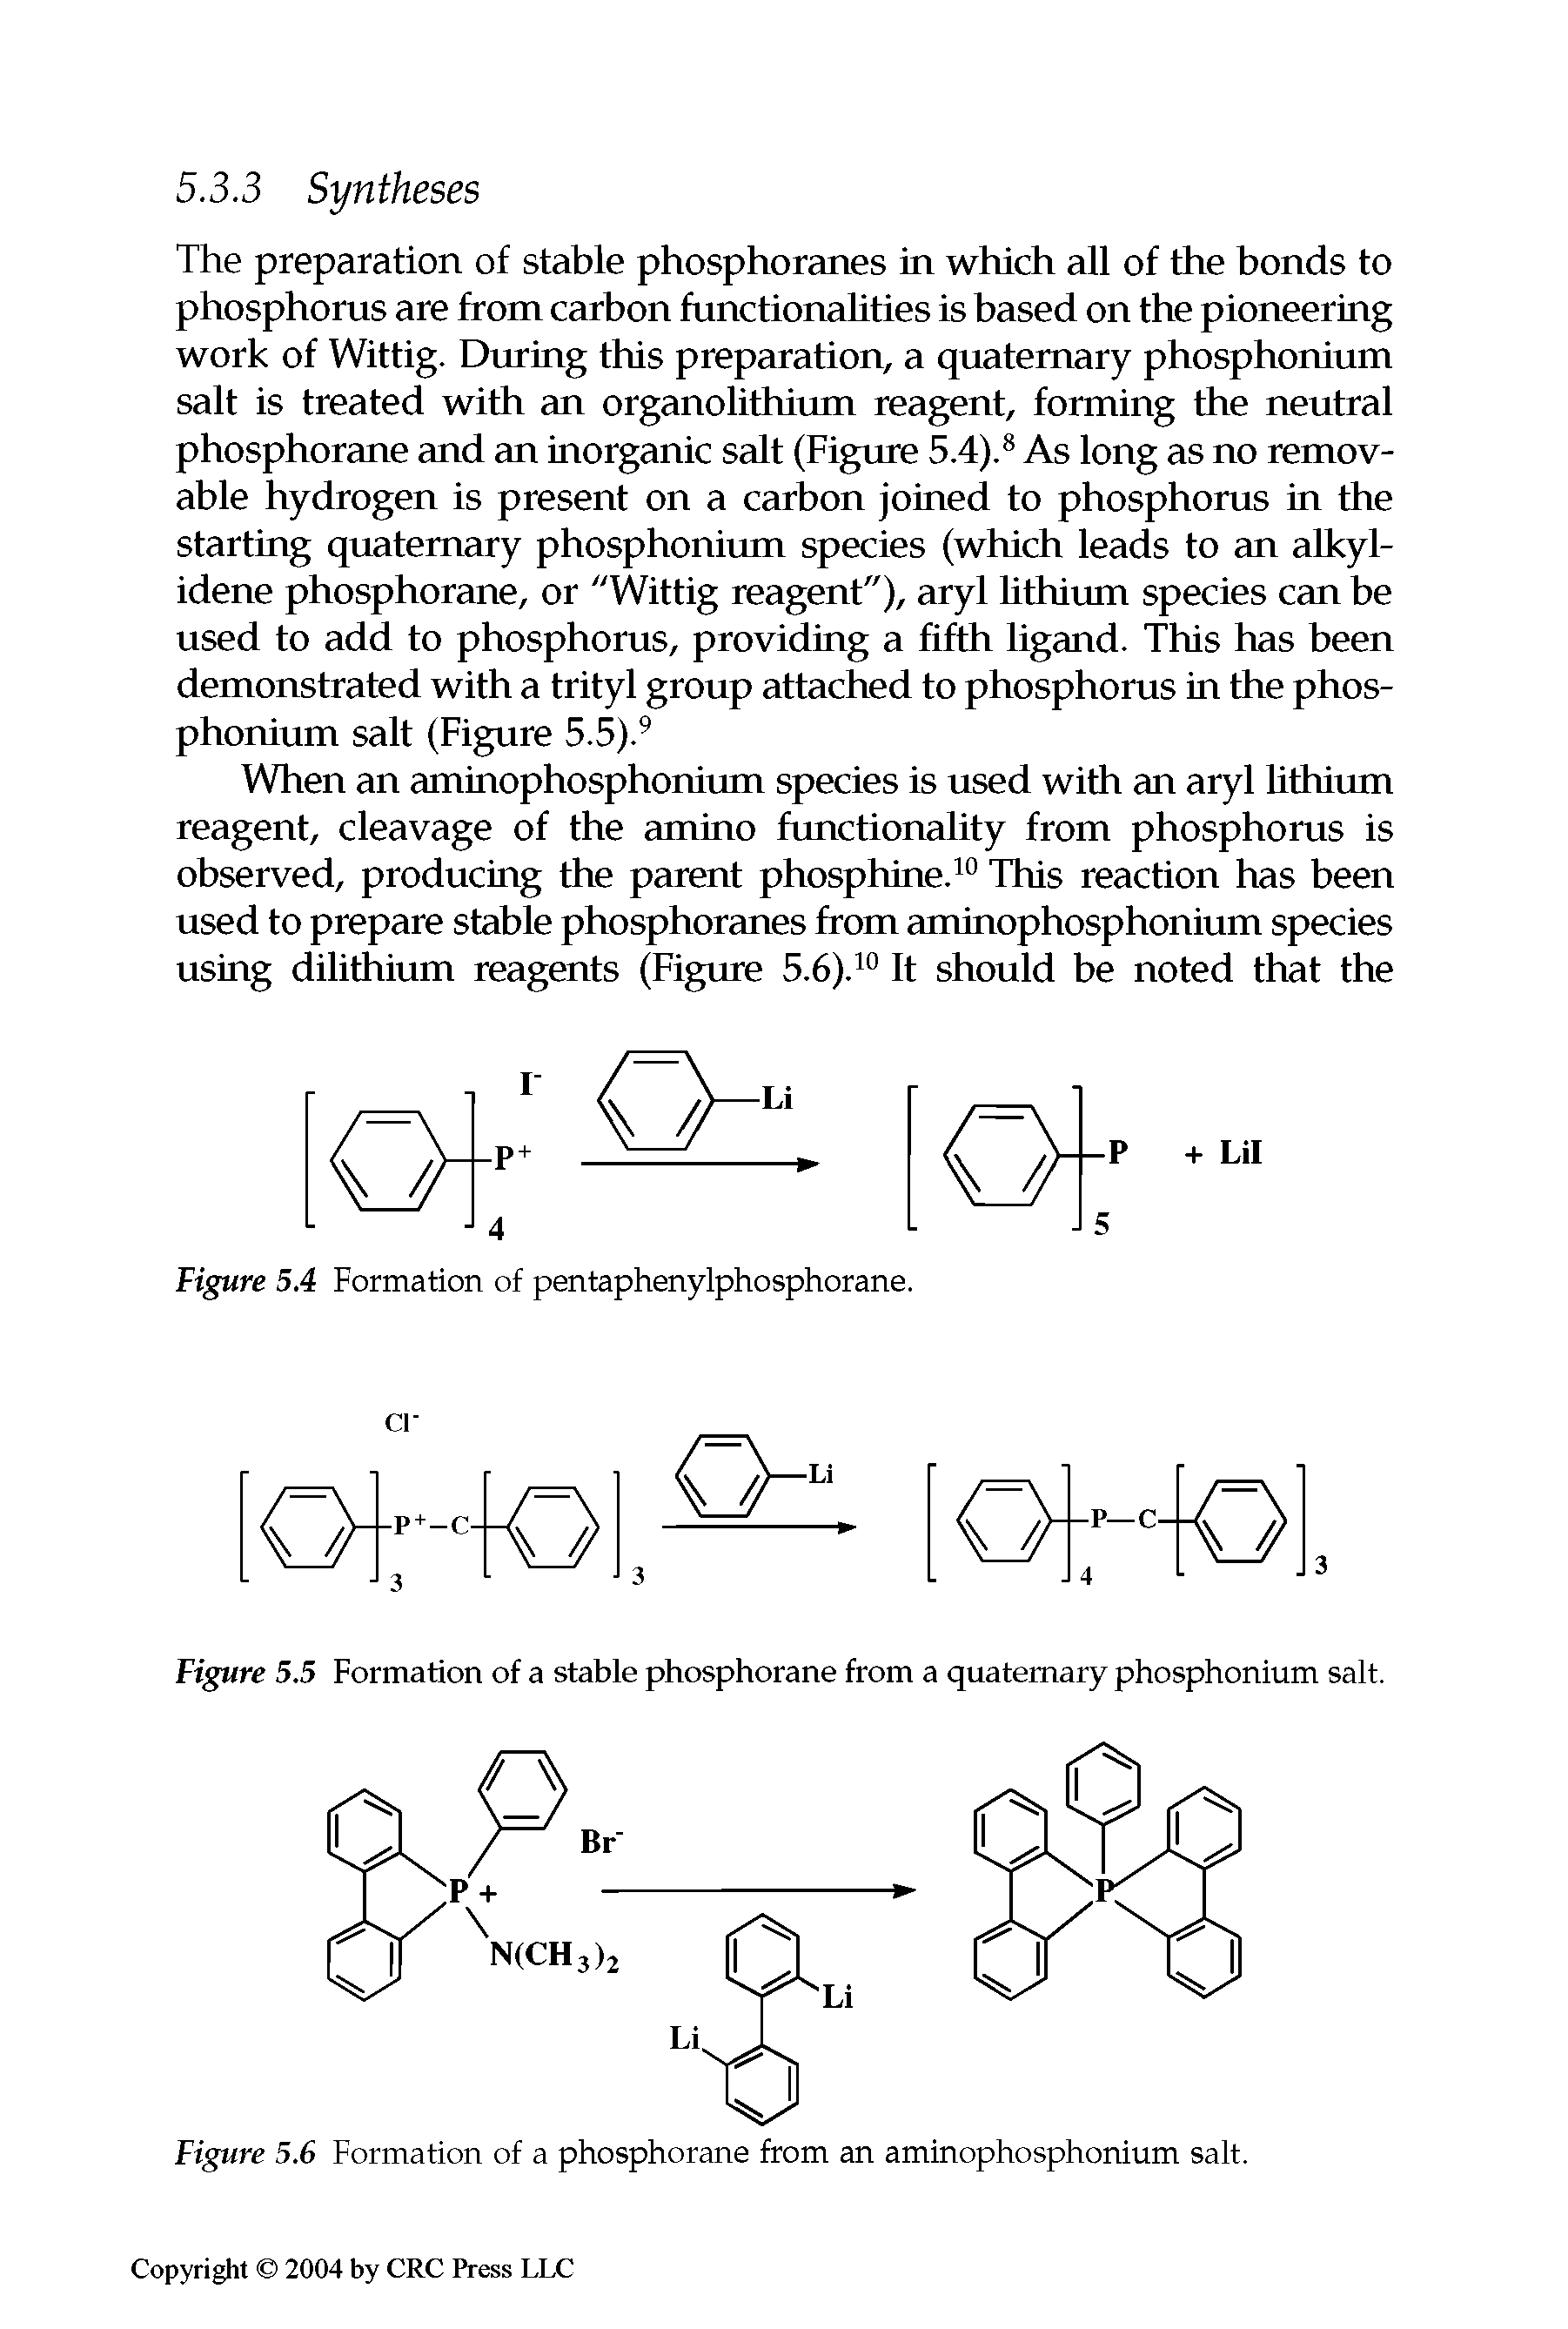 Figure 5.5 Formation of a stable phosphorane from a quaternary phosphonium salt.